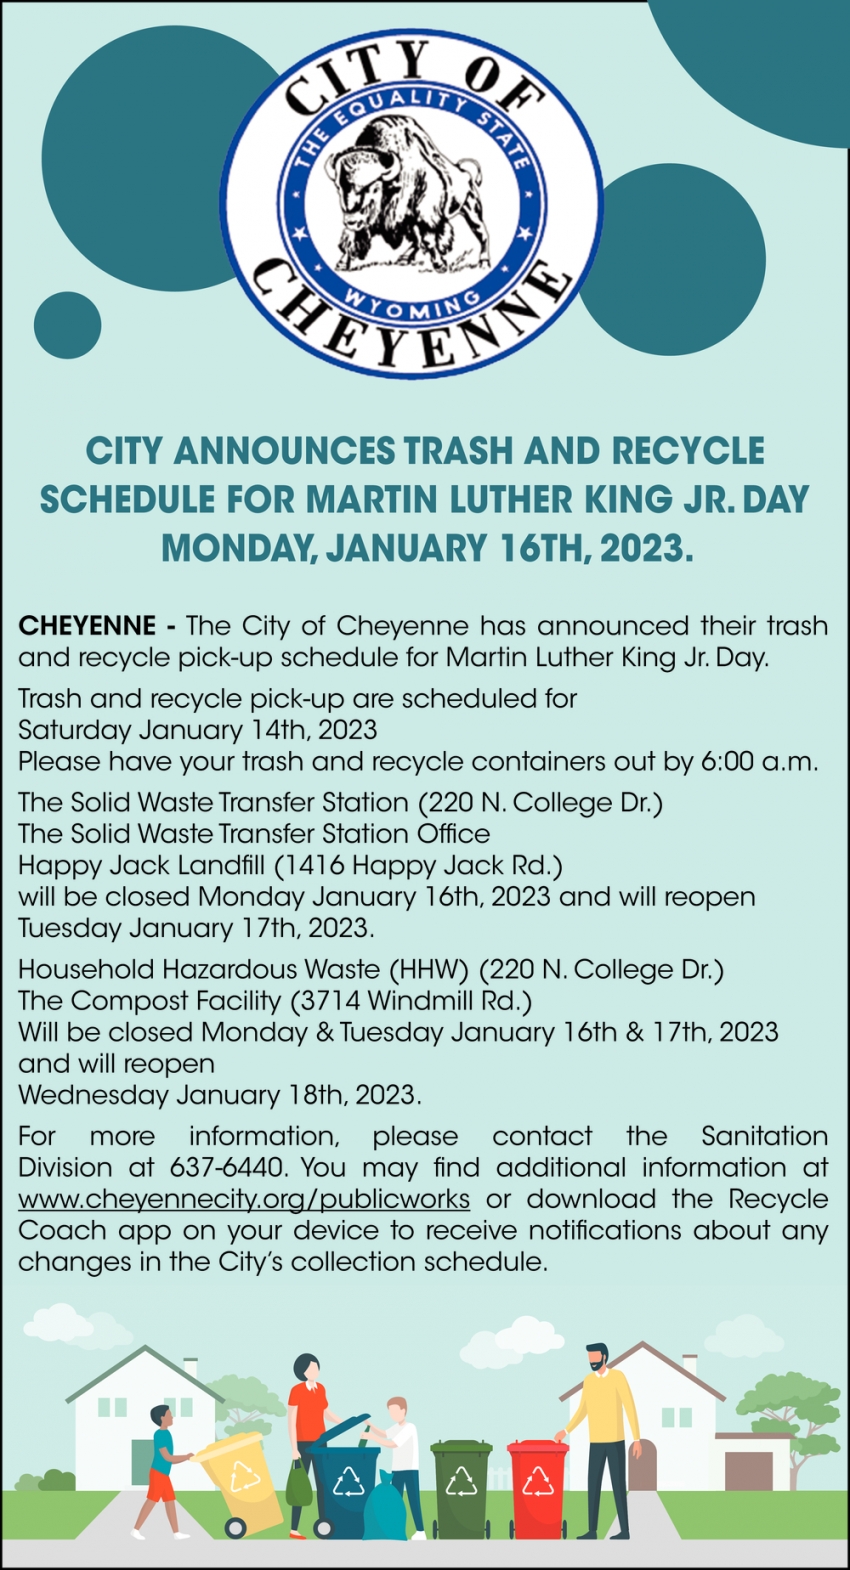 City Announces Trash and Recycle Schedule for Martin Luther King Jr. Day